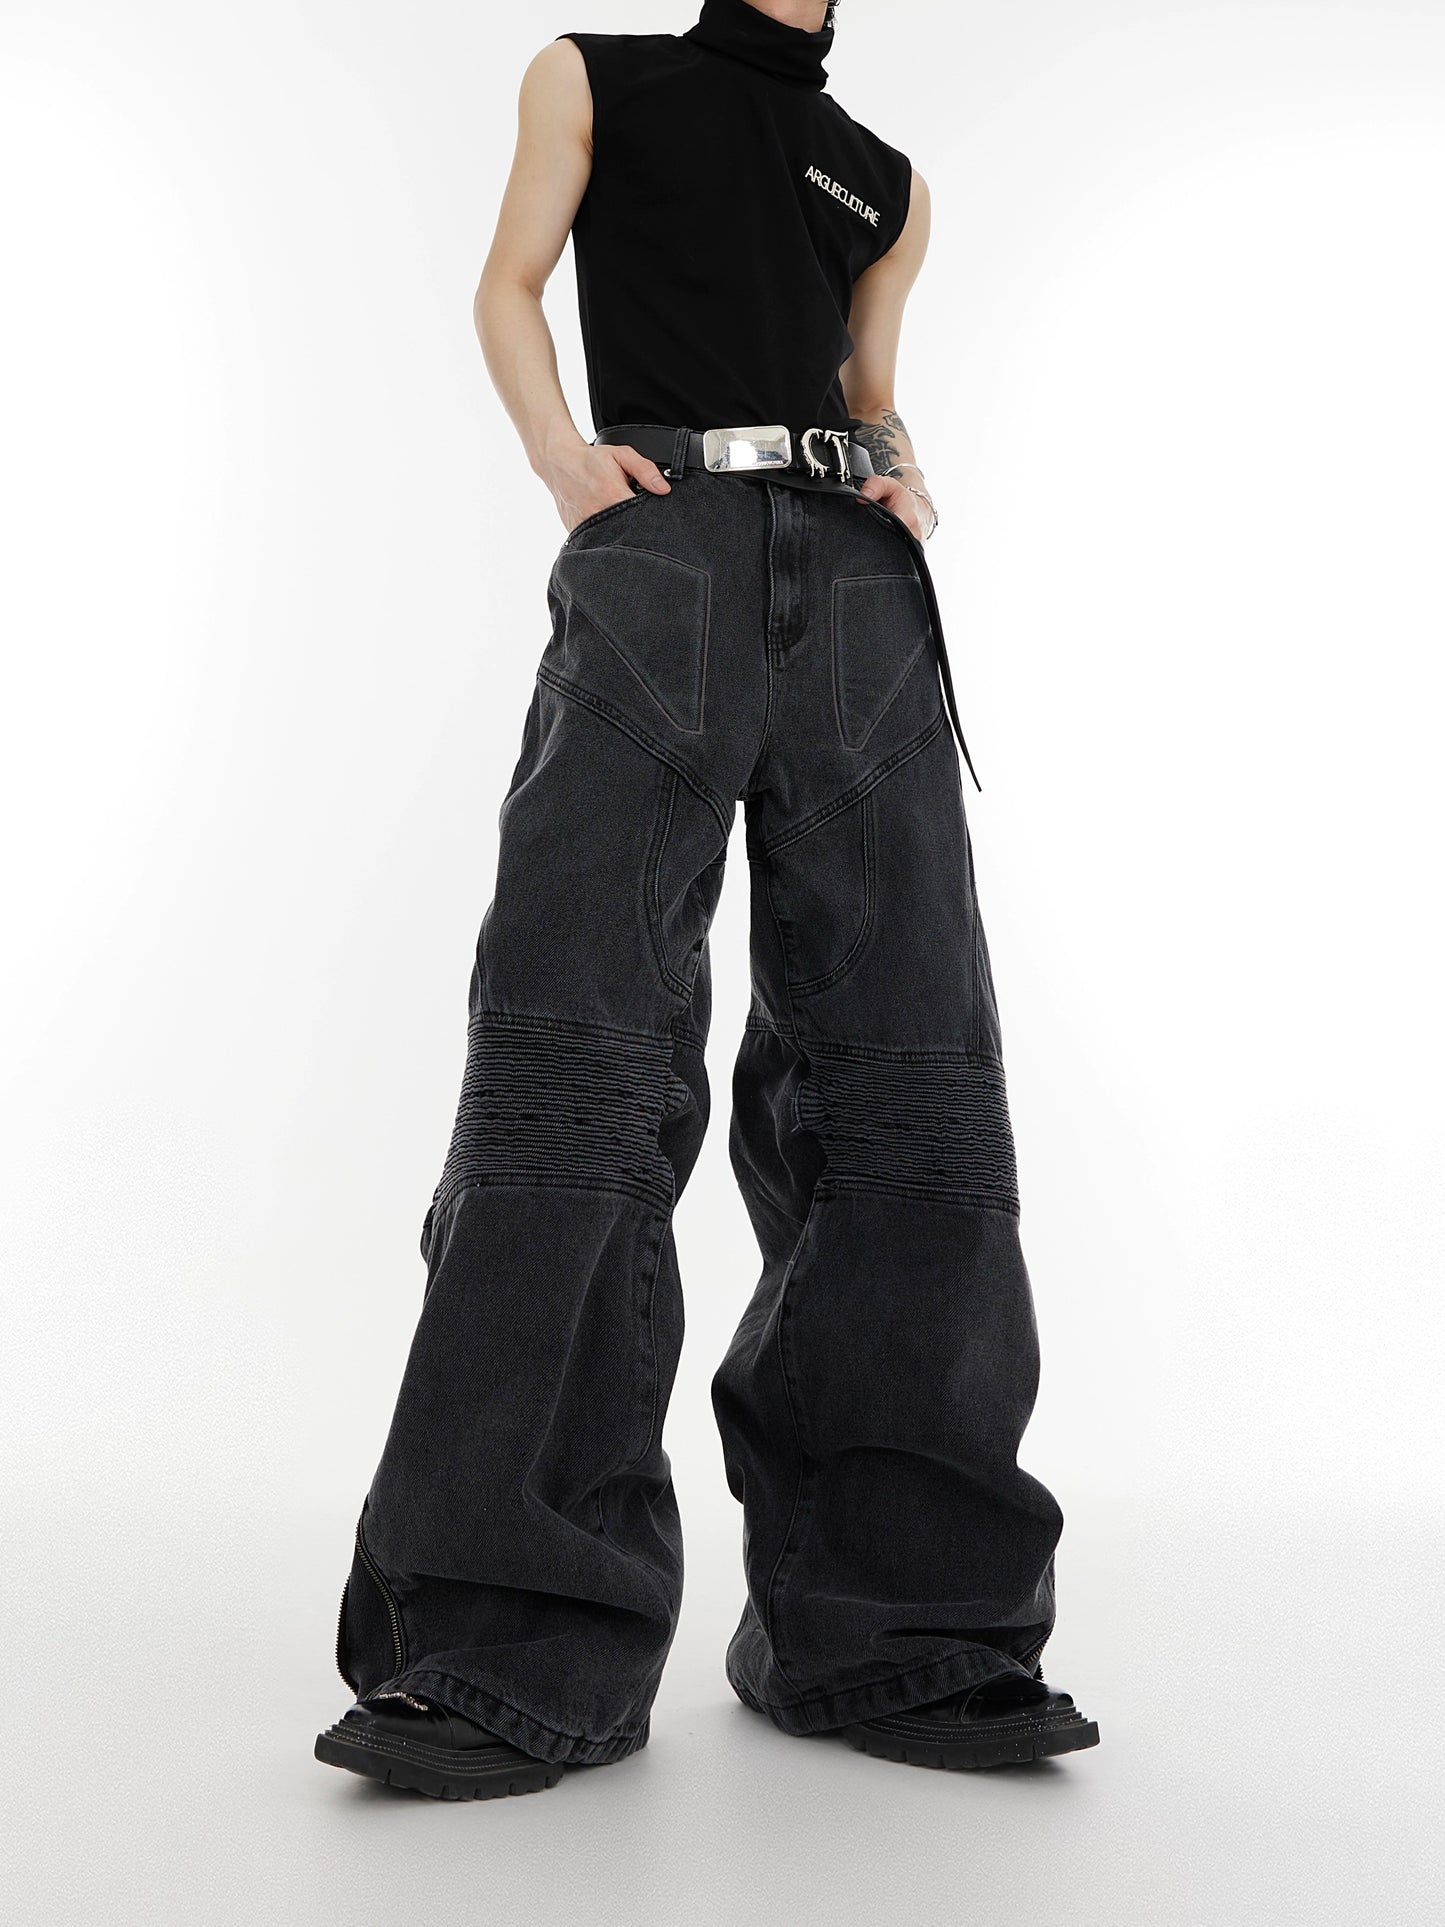 CulturE niche vintage washed pressed pleated deconstructed jeans metal zipper loose wide-leg drape cargo pants